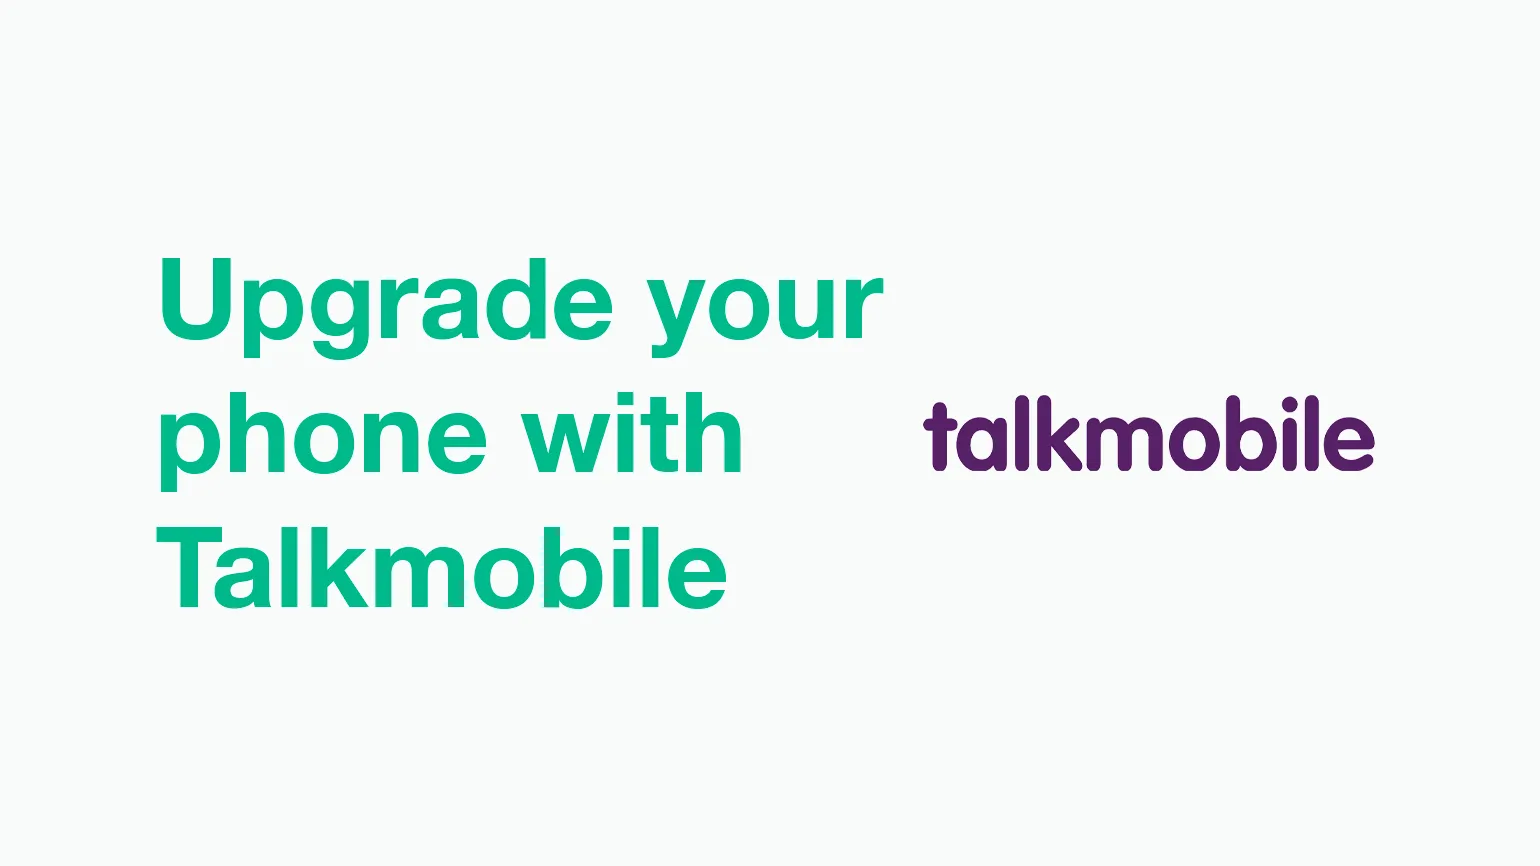 Upgrading your phone on Talkmobile